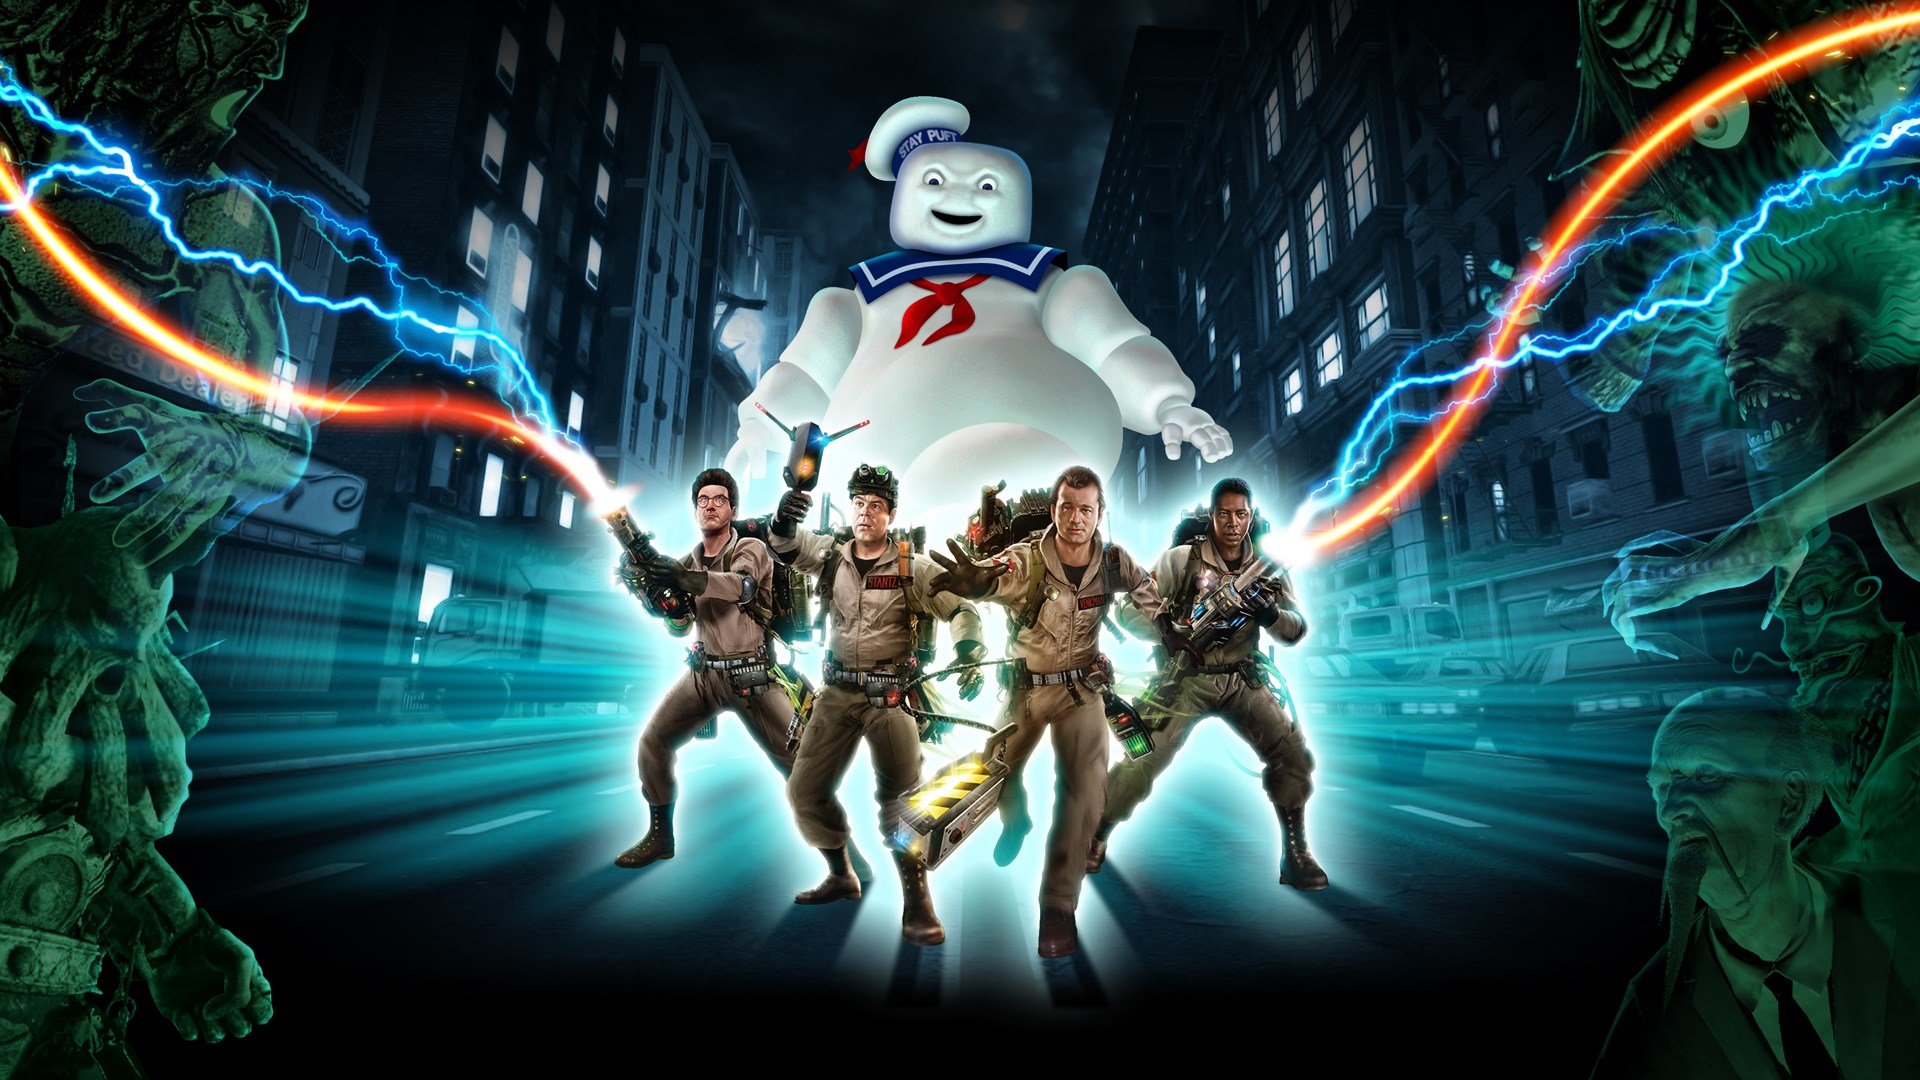 Ghostbusters: The Video Game Remastered cover image